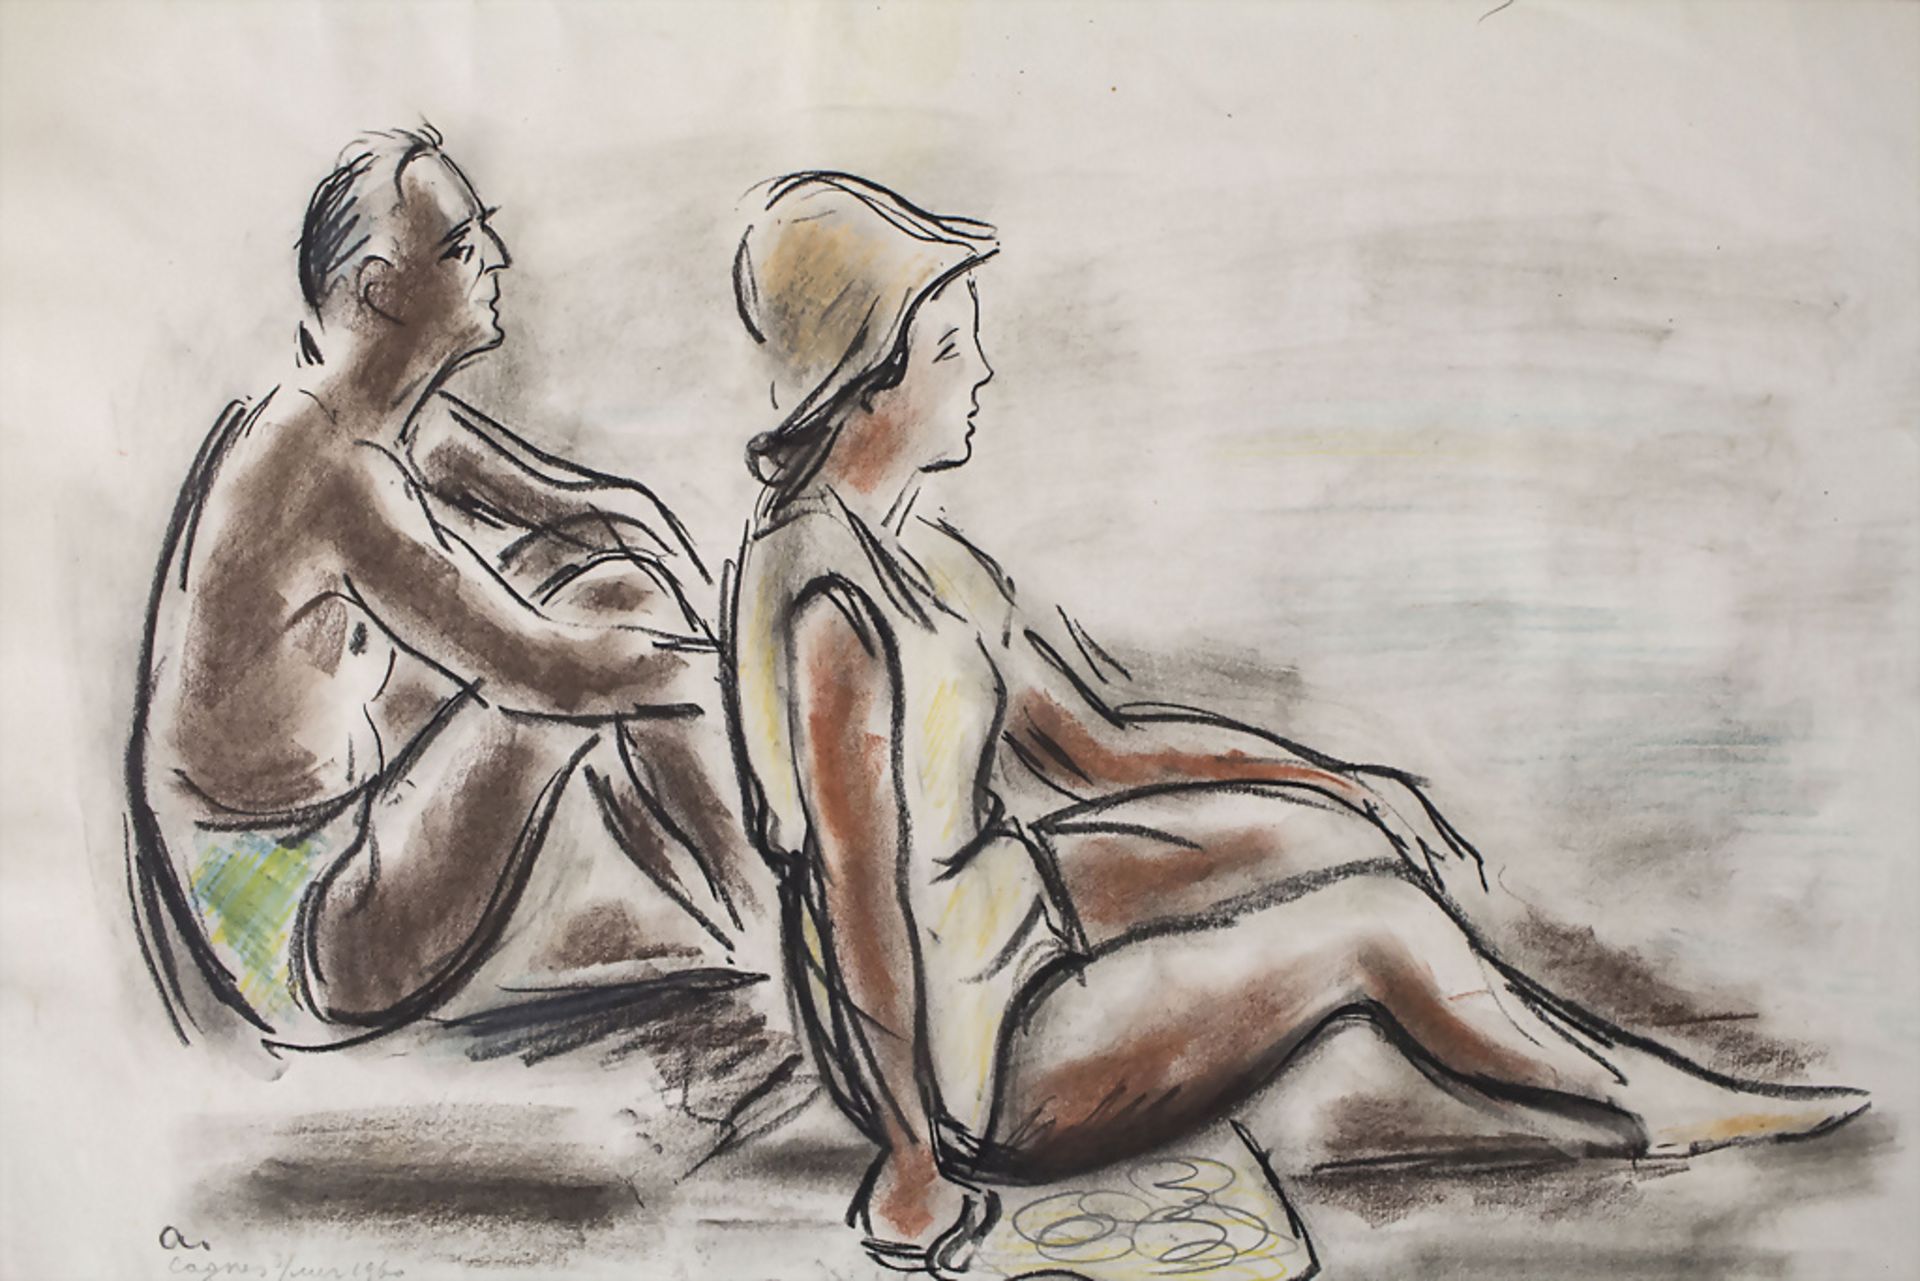 Michel ADLEN (1898-1980), 'Paar am Strand' / 'Couple at the beach', 1960 - Image 2 of 4